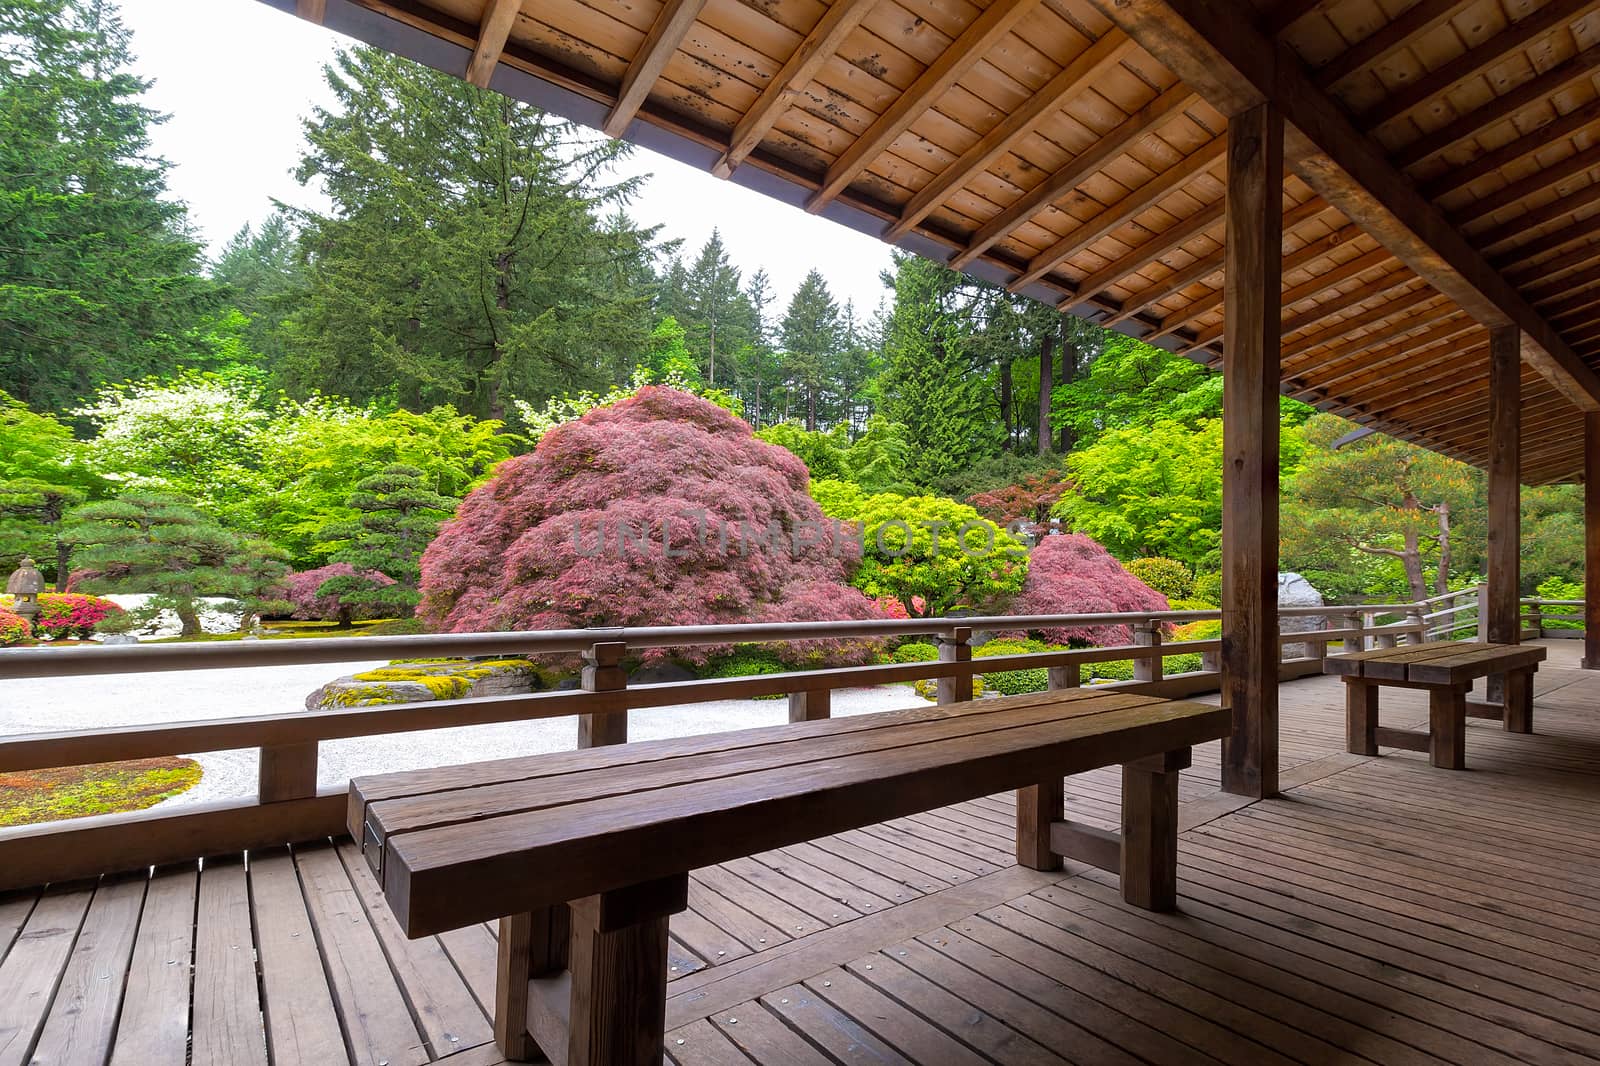 View of Japanese Garden from the Veranda by Davidgn